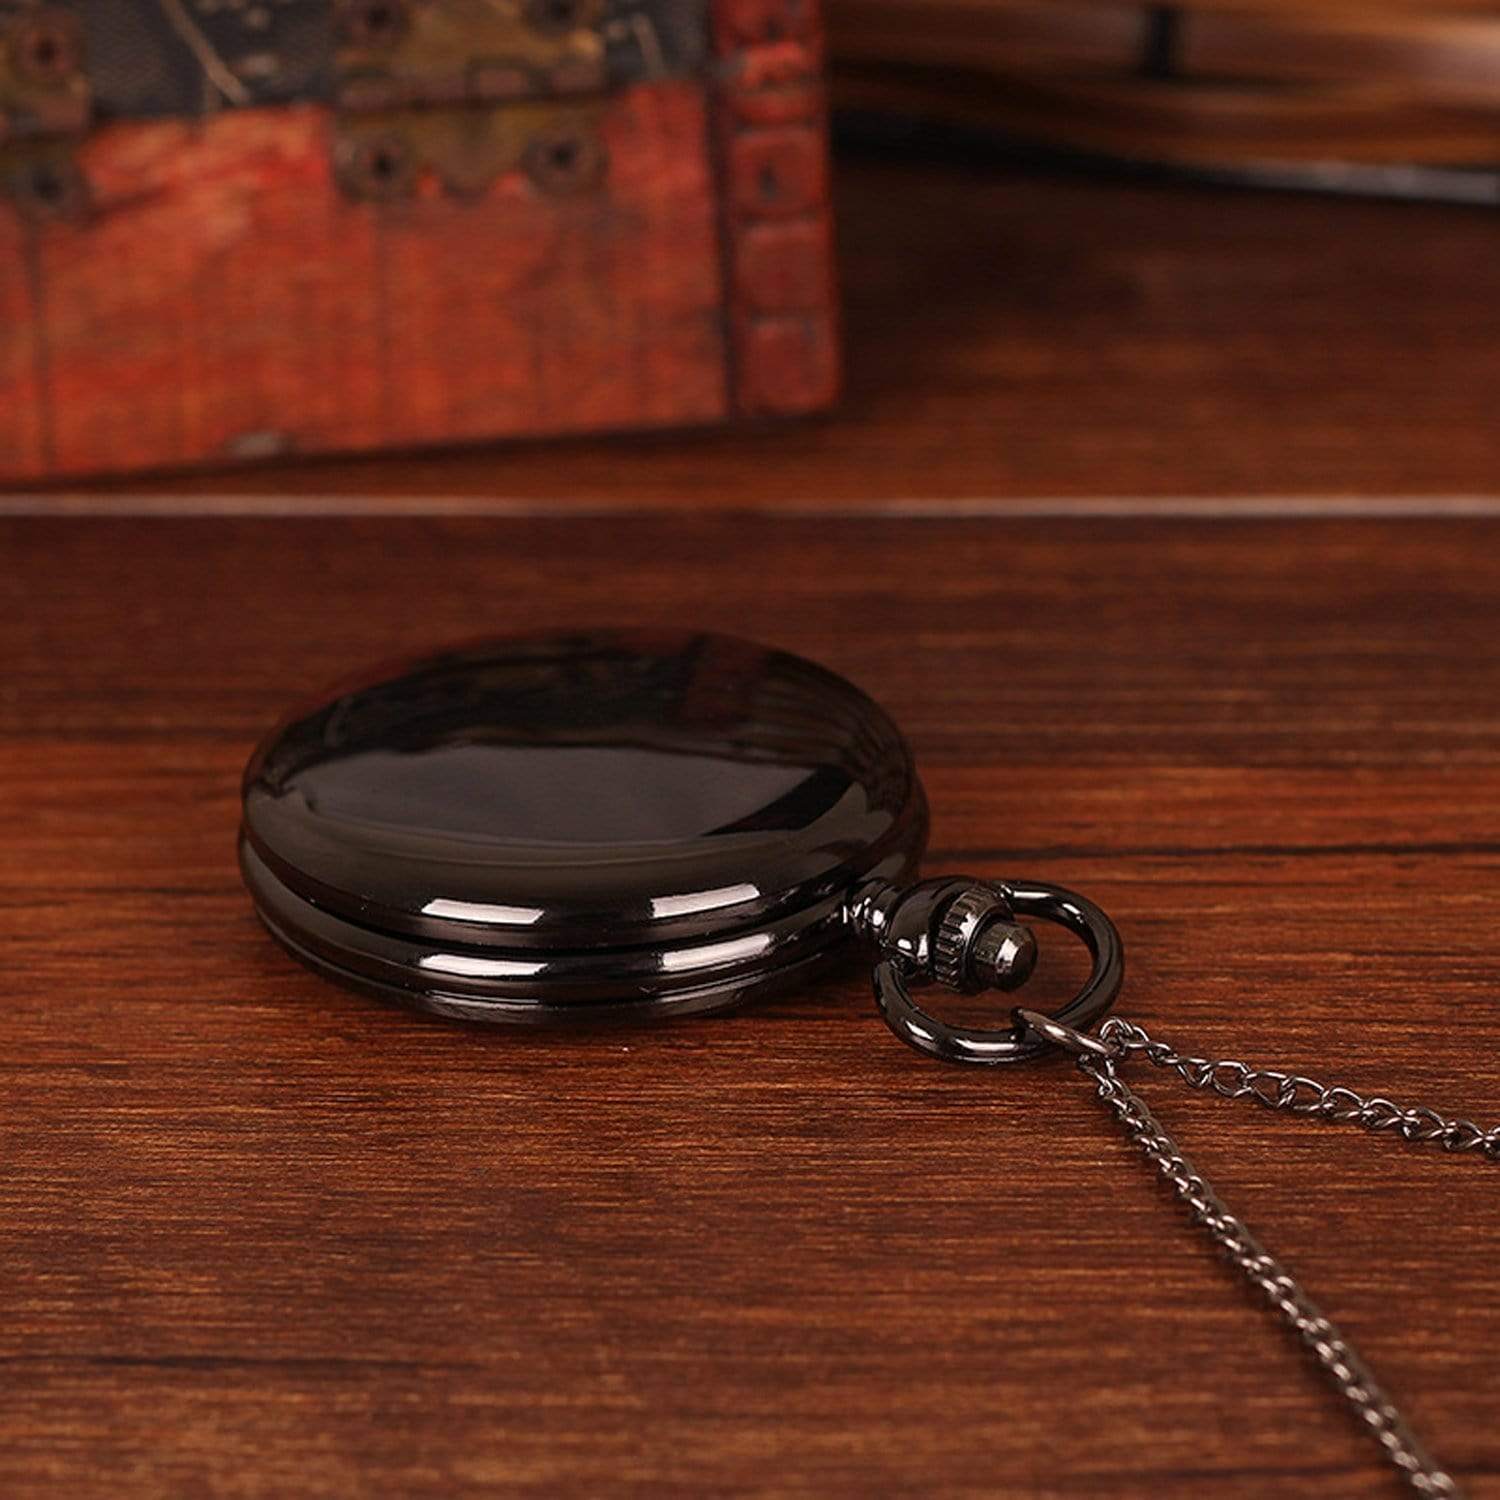 Pocket Watches To Our Son - Remember How Much You Are Loved Pocket Watch GiveMe-Gifts